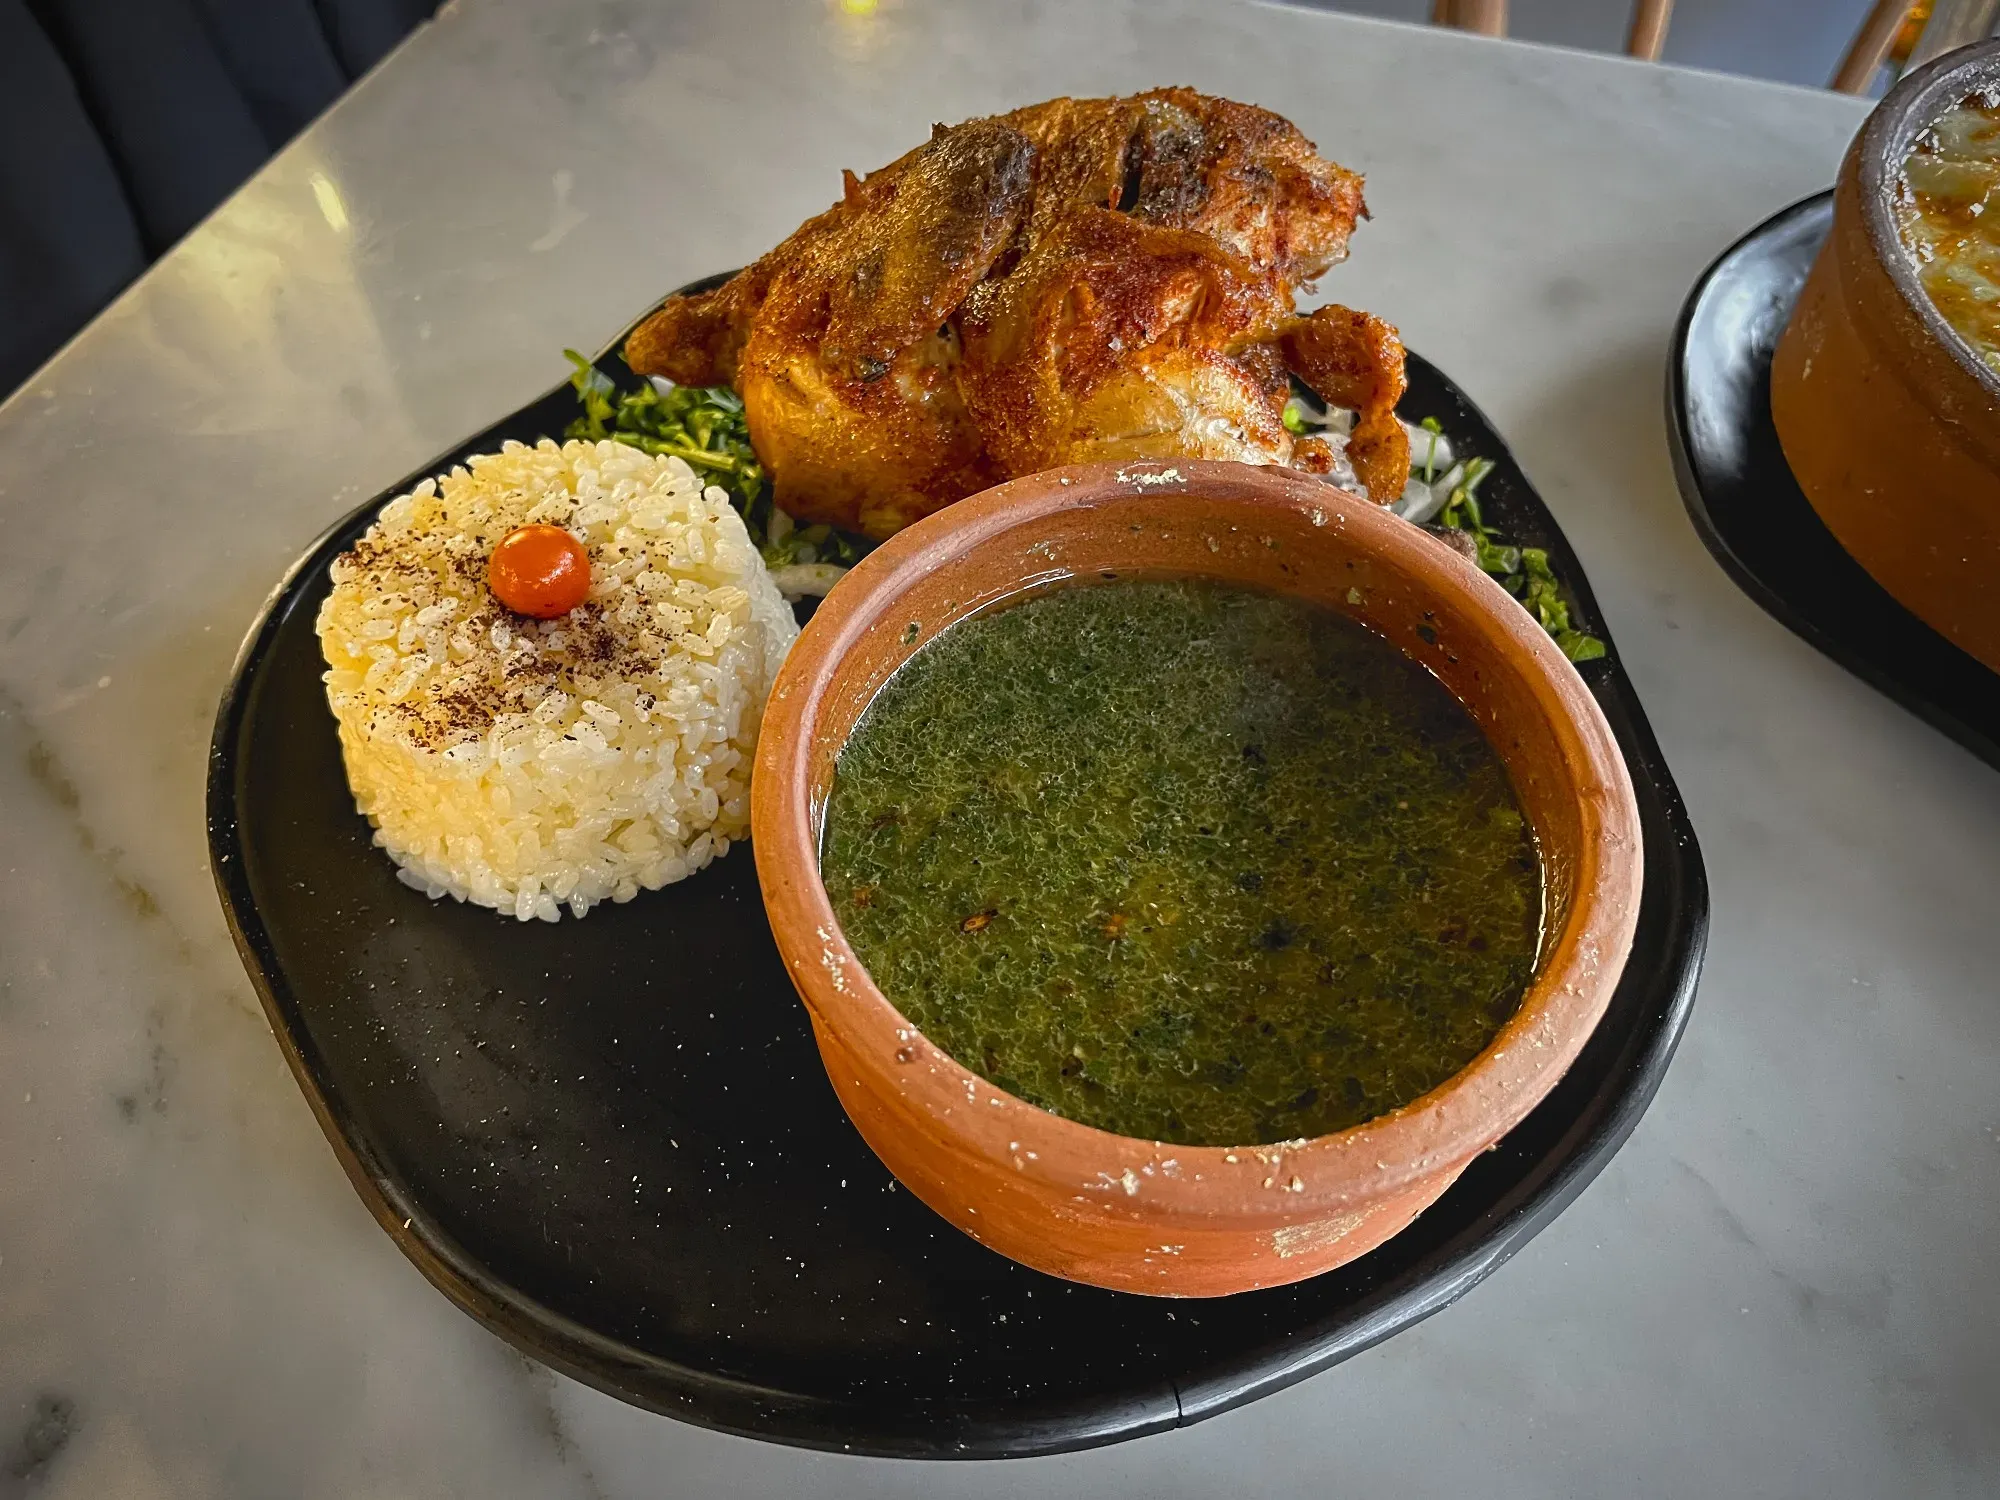 Molokhia in a clay pot with a side of rice and chicken, angled shot.